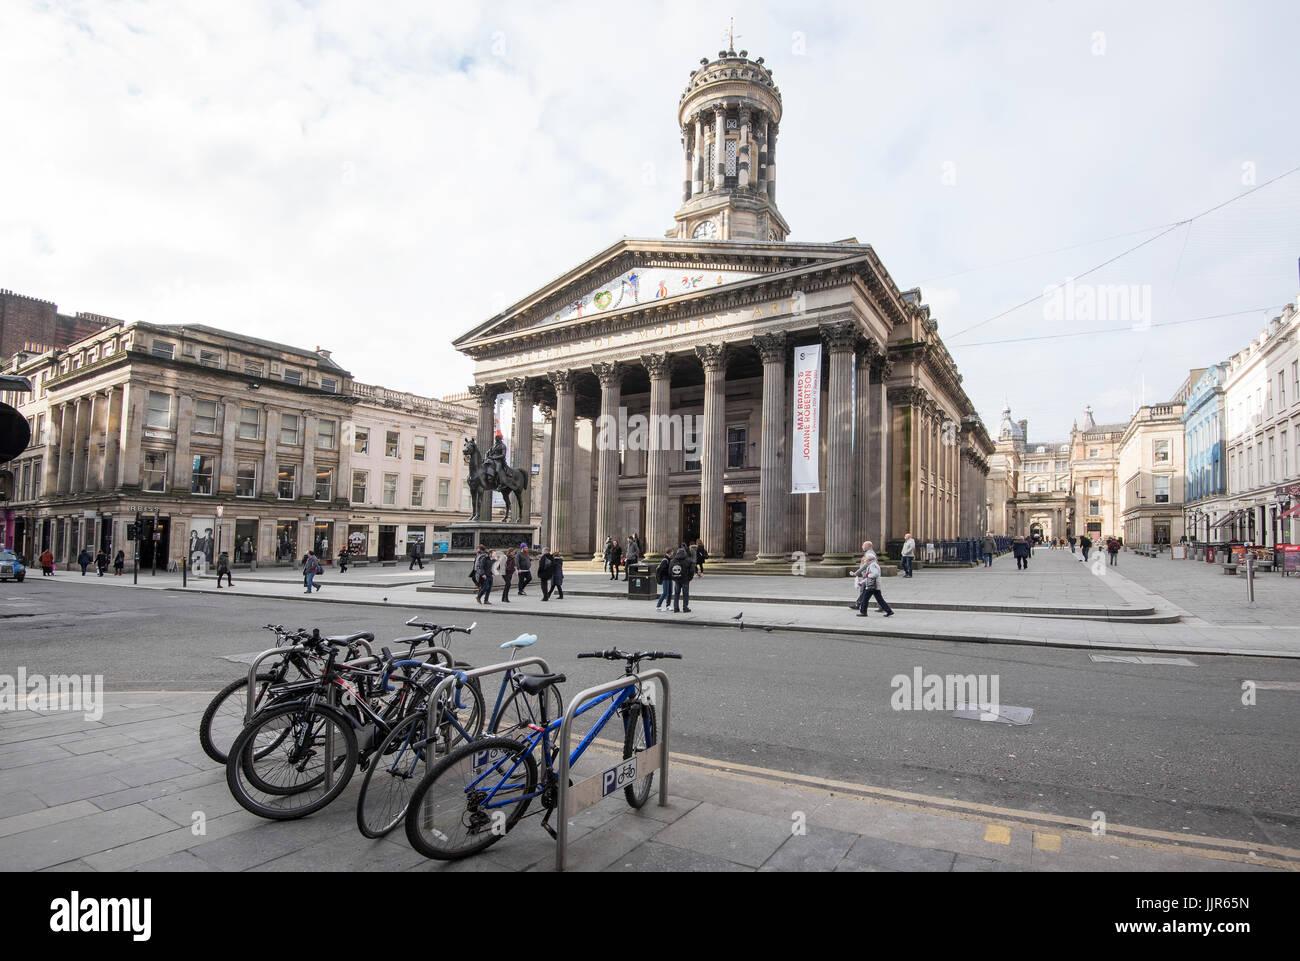 Royal Exchange Square in Glasgow featuring the Gallery of Modern Art (GOMA) with the famous statue of the Duke of Wellingtonn on his horse outside. Stock Photo